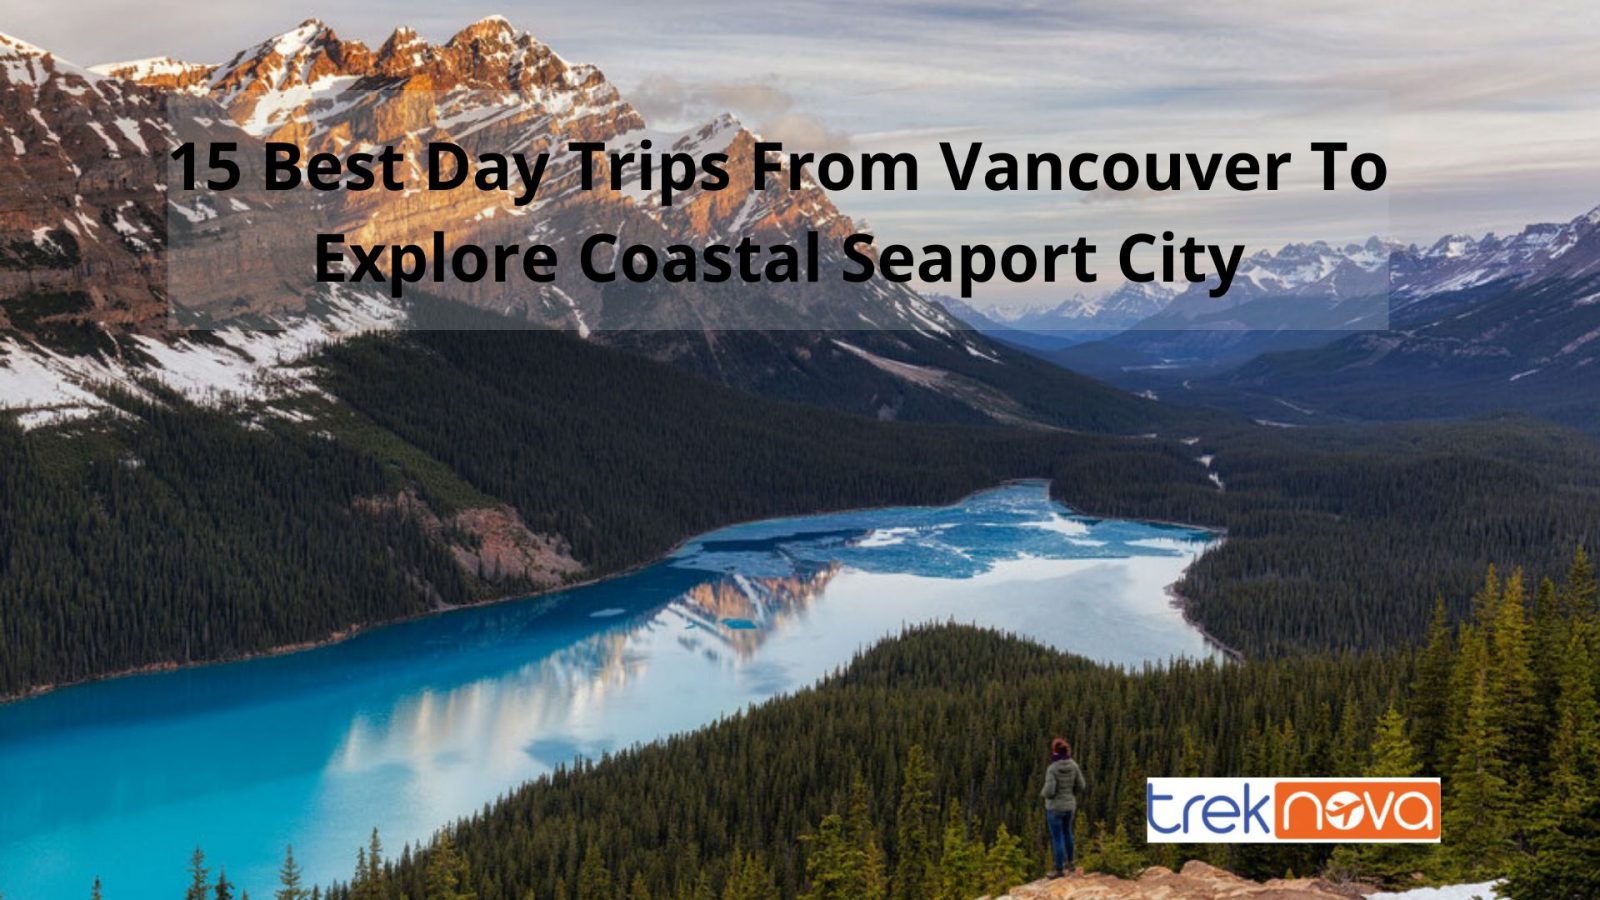 15 Best Day Trips From Vancouver To Explore Coastal Seaport City